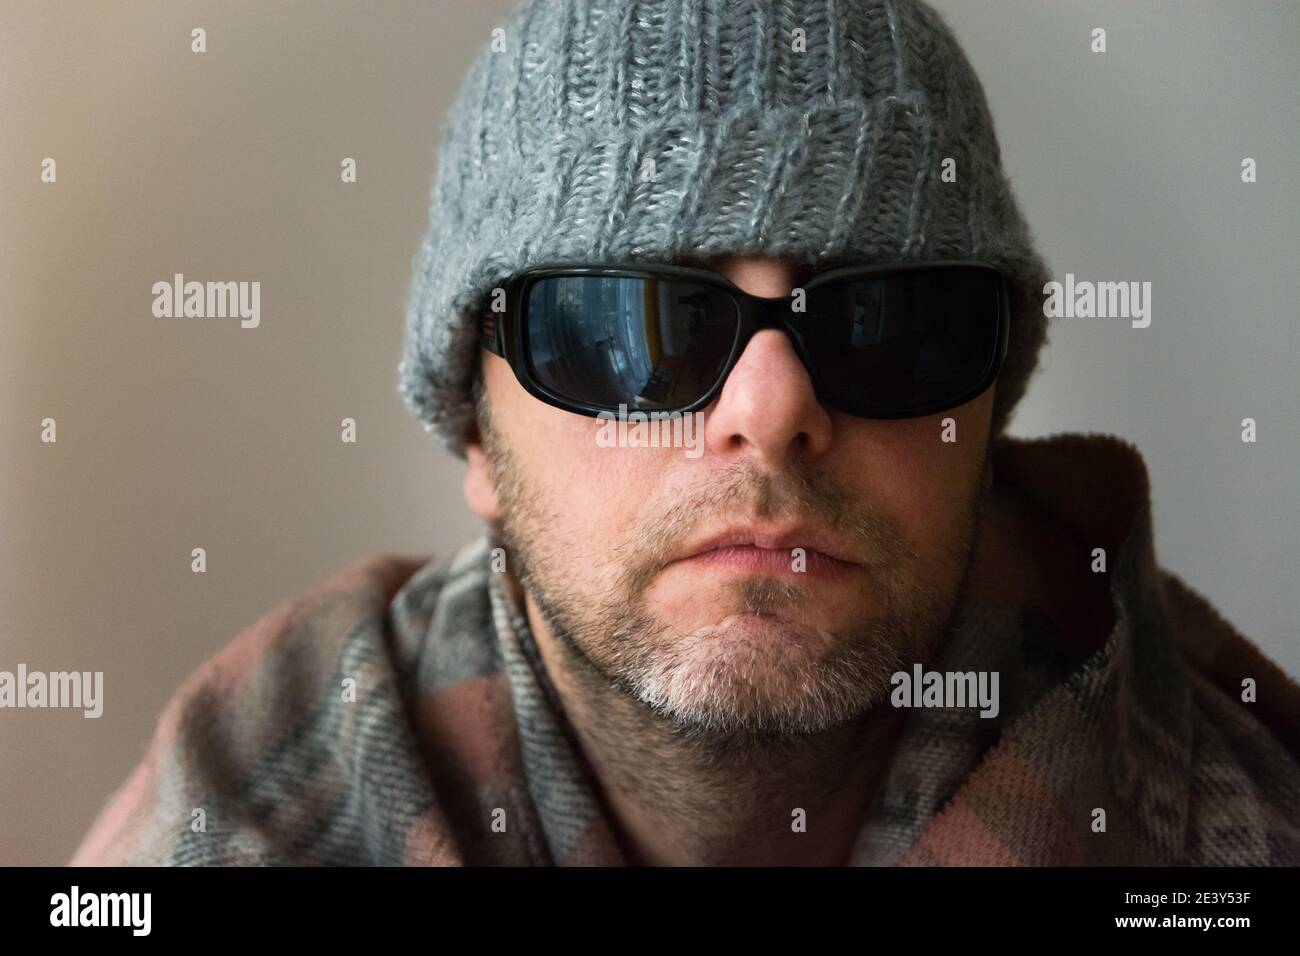 A man with a beard with glasses and a winter hat, portrait Stock Photo